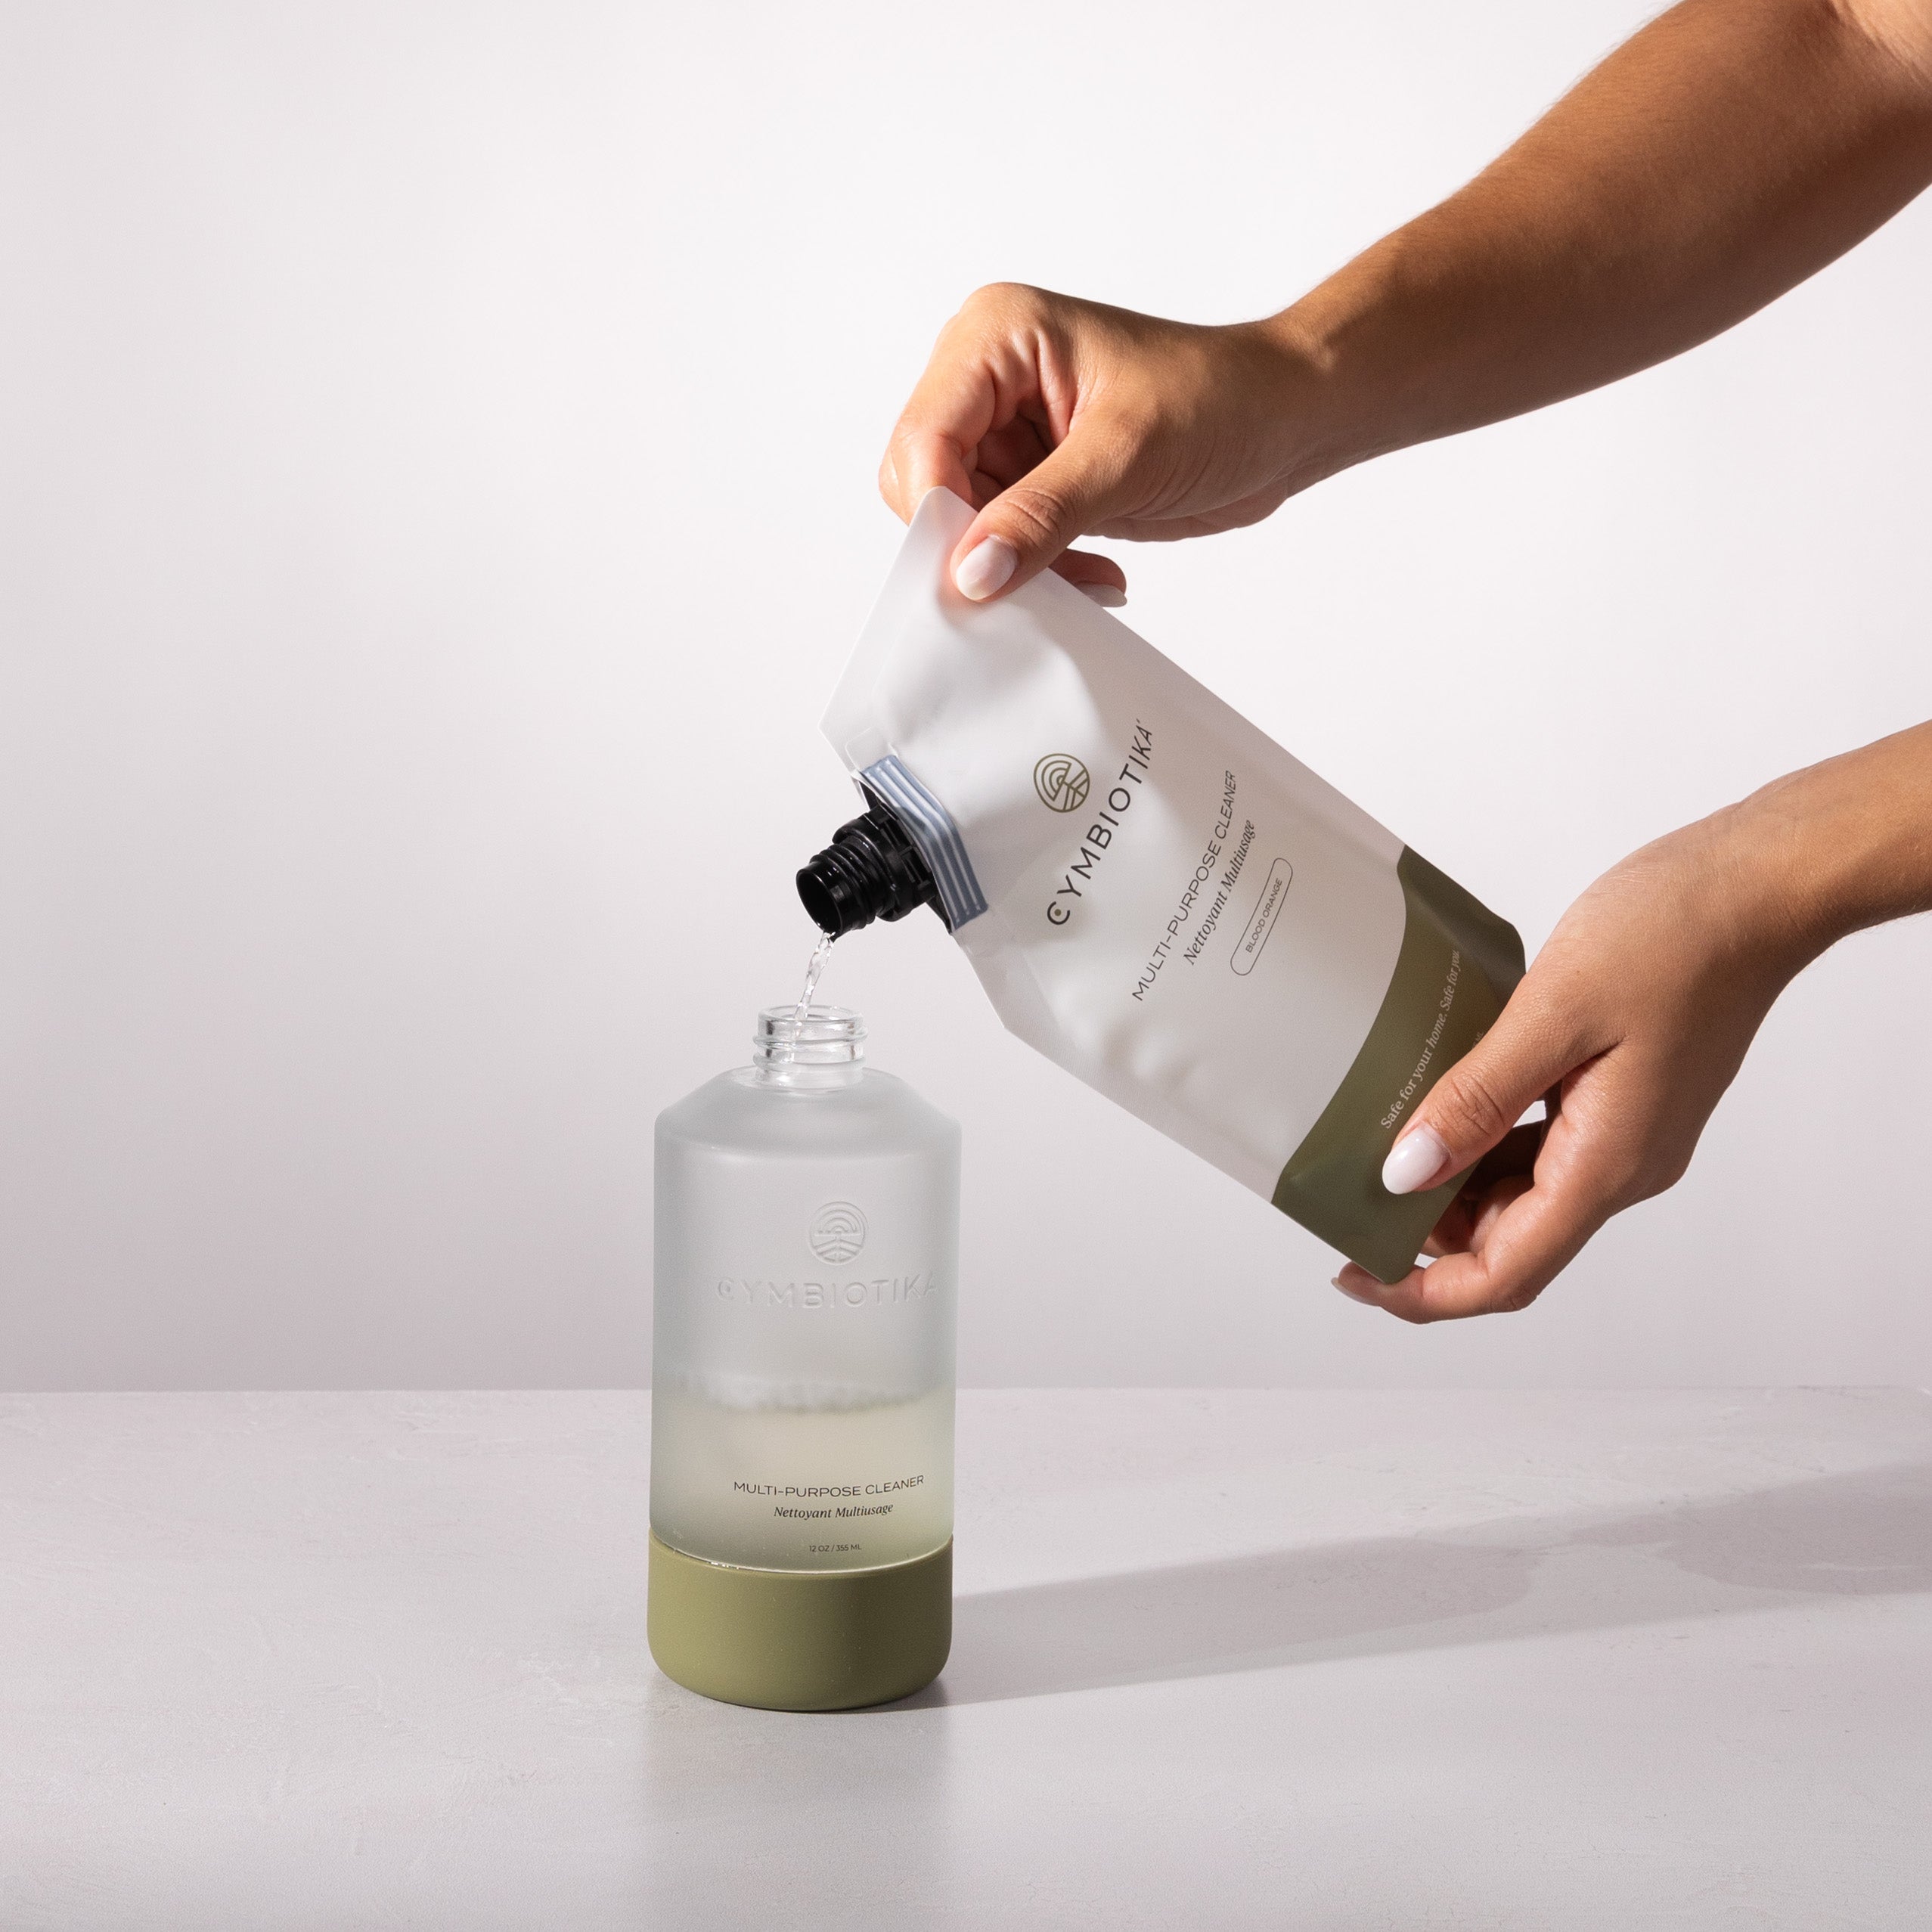 Multi-Purpose Cleaner Bottle being Refilled